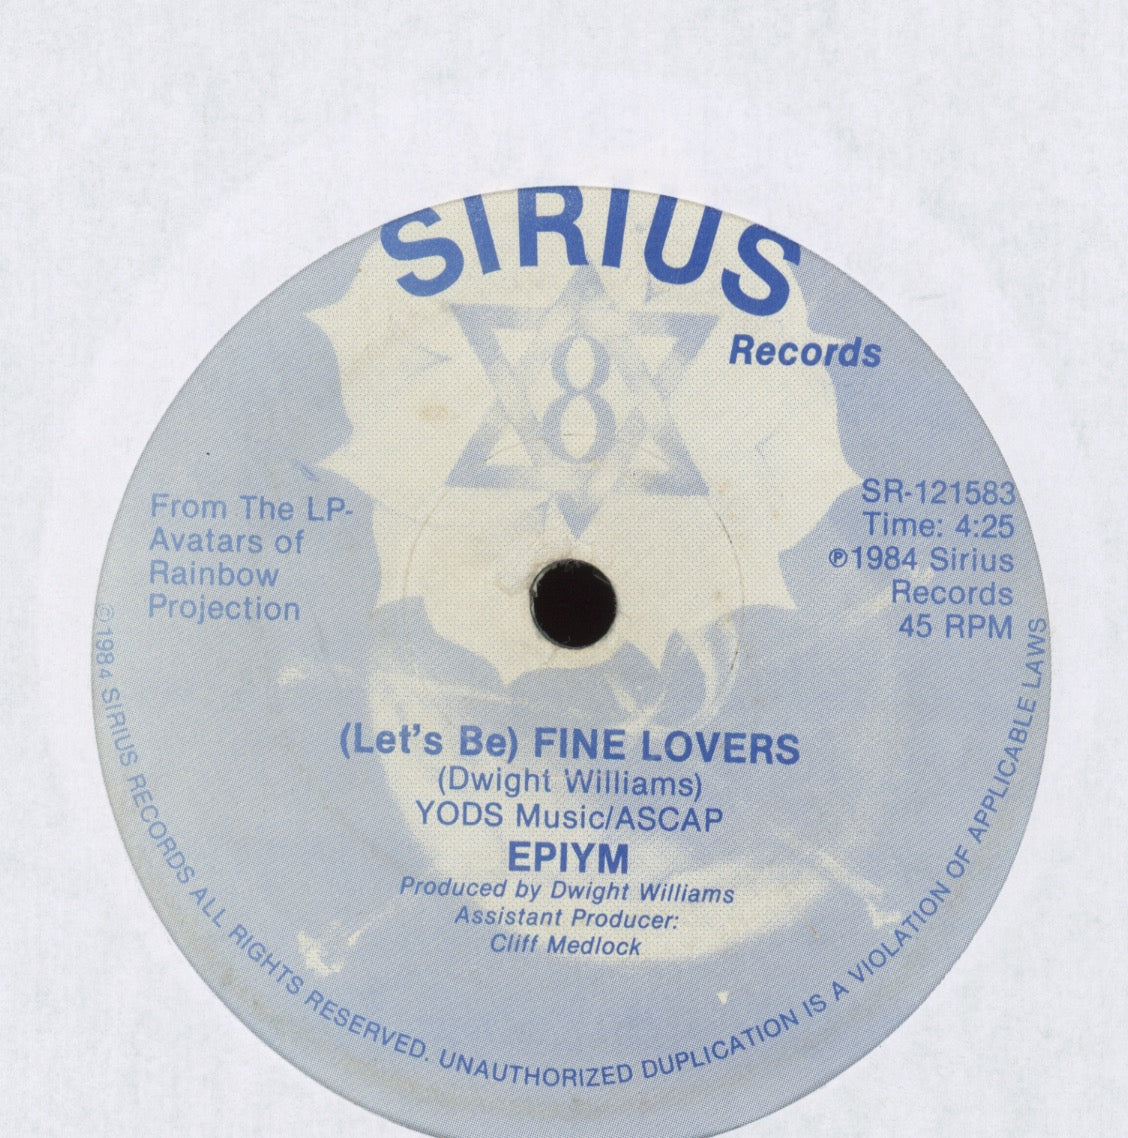 EPIYM - (Let's Be) Fine Lovers on Sirius Obscure Modern Soul Boogie